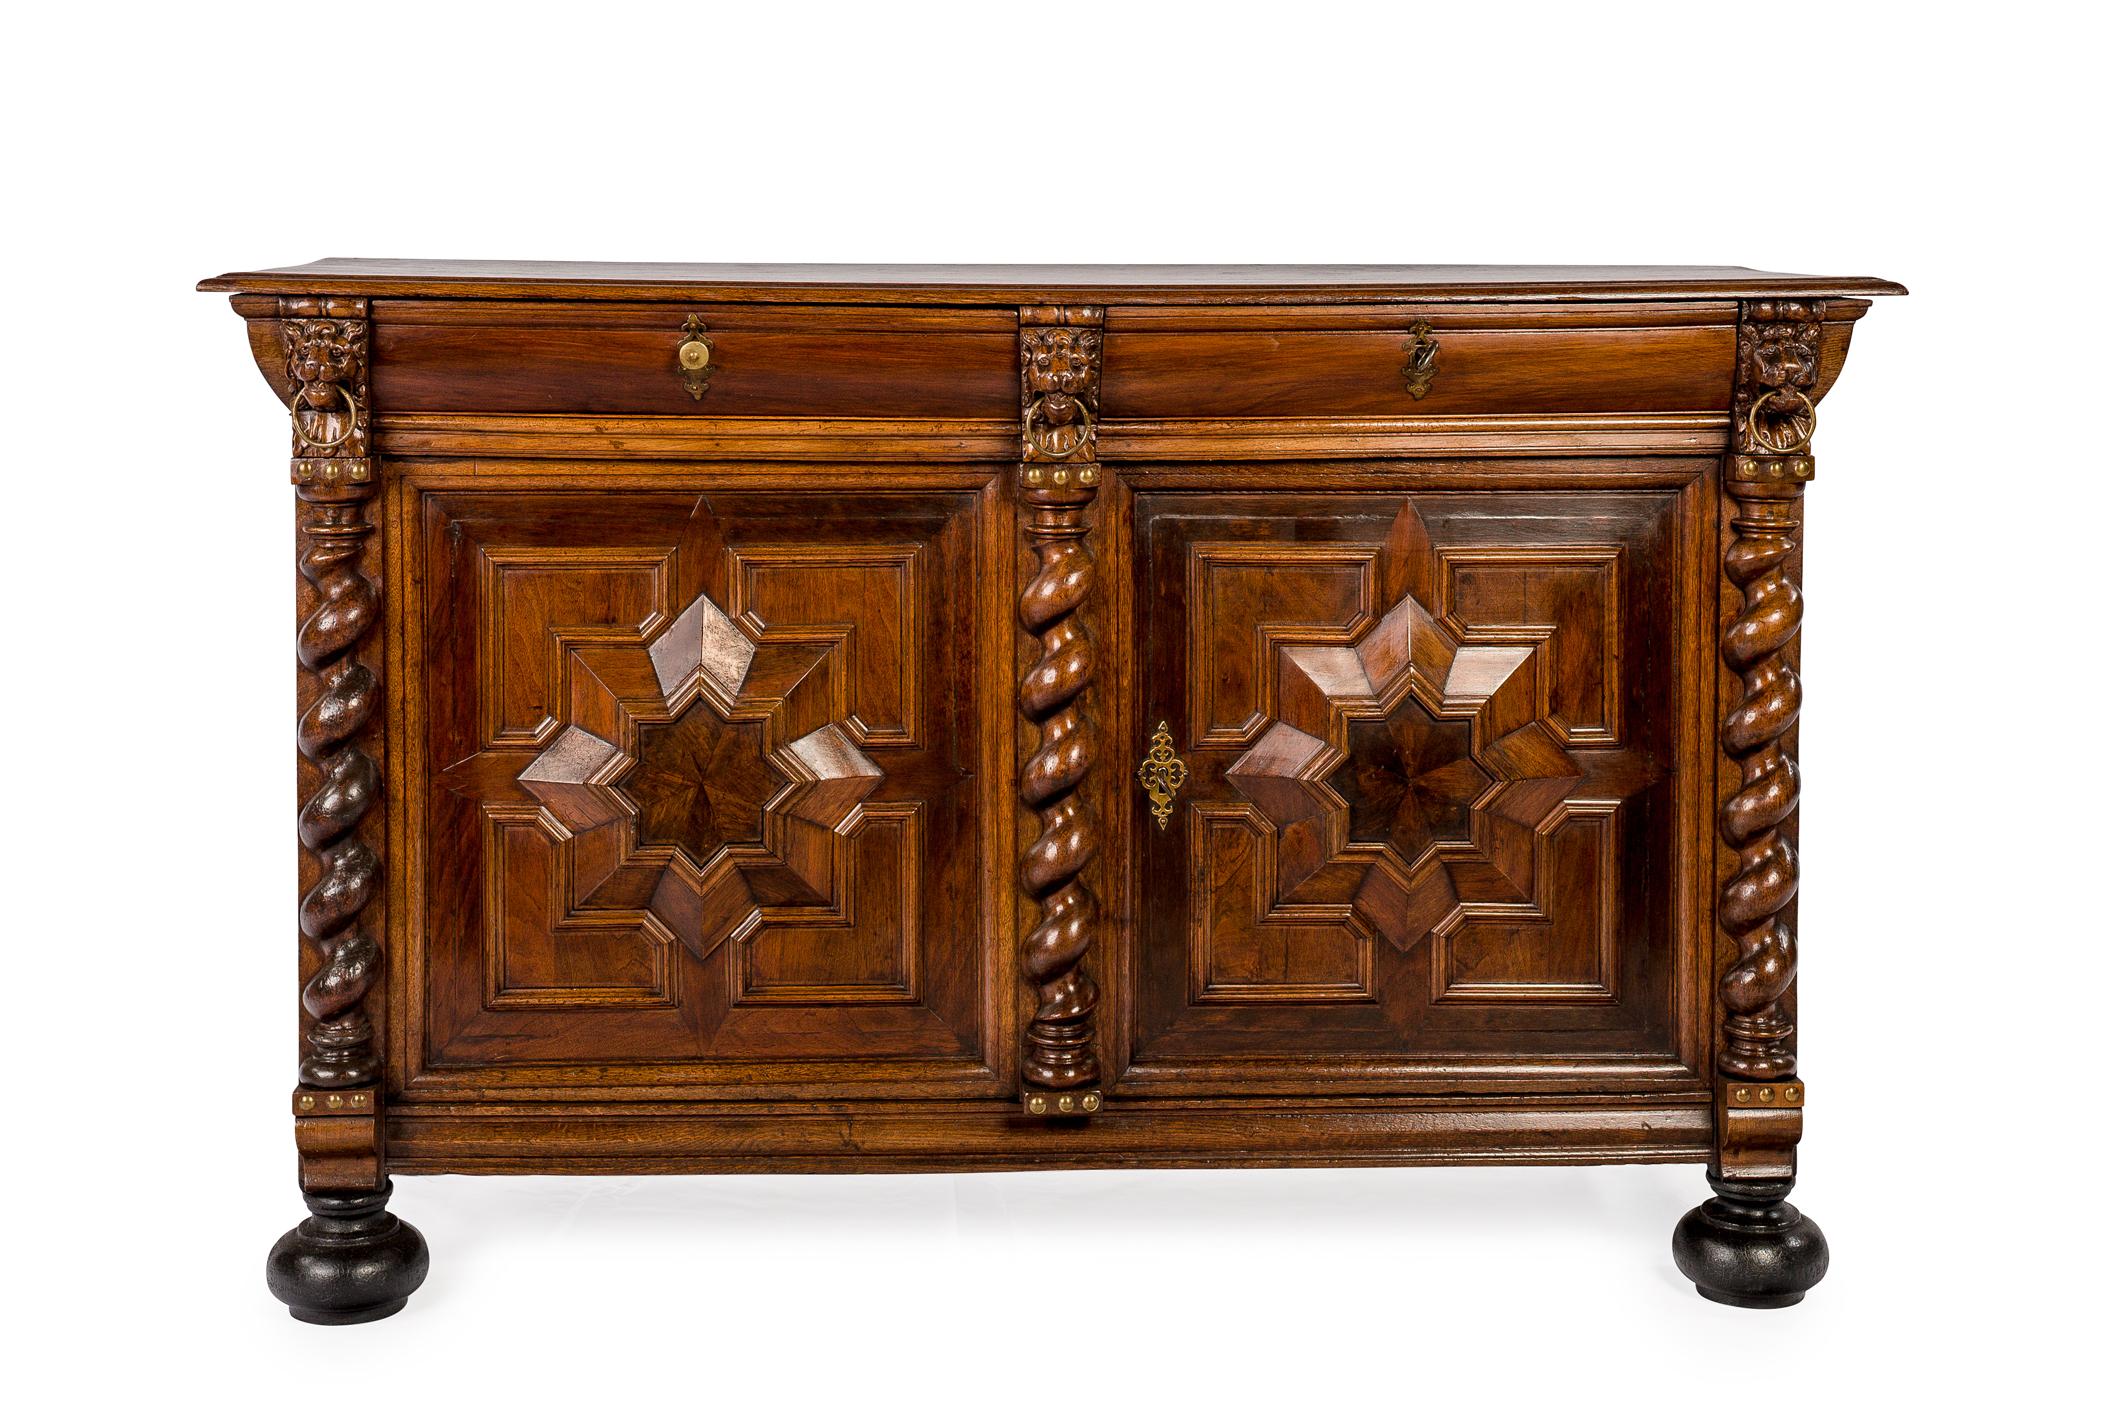 This rare and rich decorated Renaissance dresser was made during the Dutch Golden age in the southern part of the Netherlands currently Belgium. It was made around 1670 and most likely in Antwerp. The dresser was made in the finest quality watered